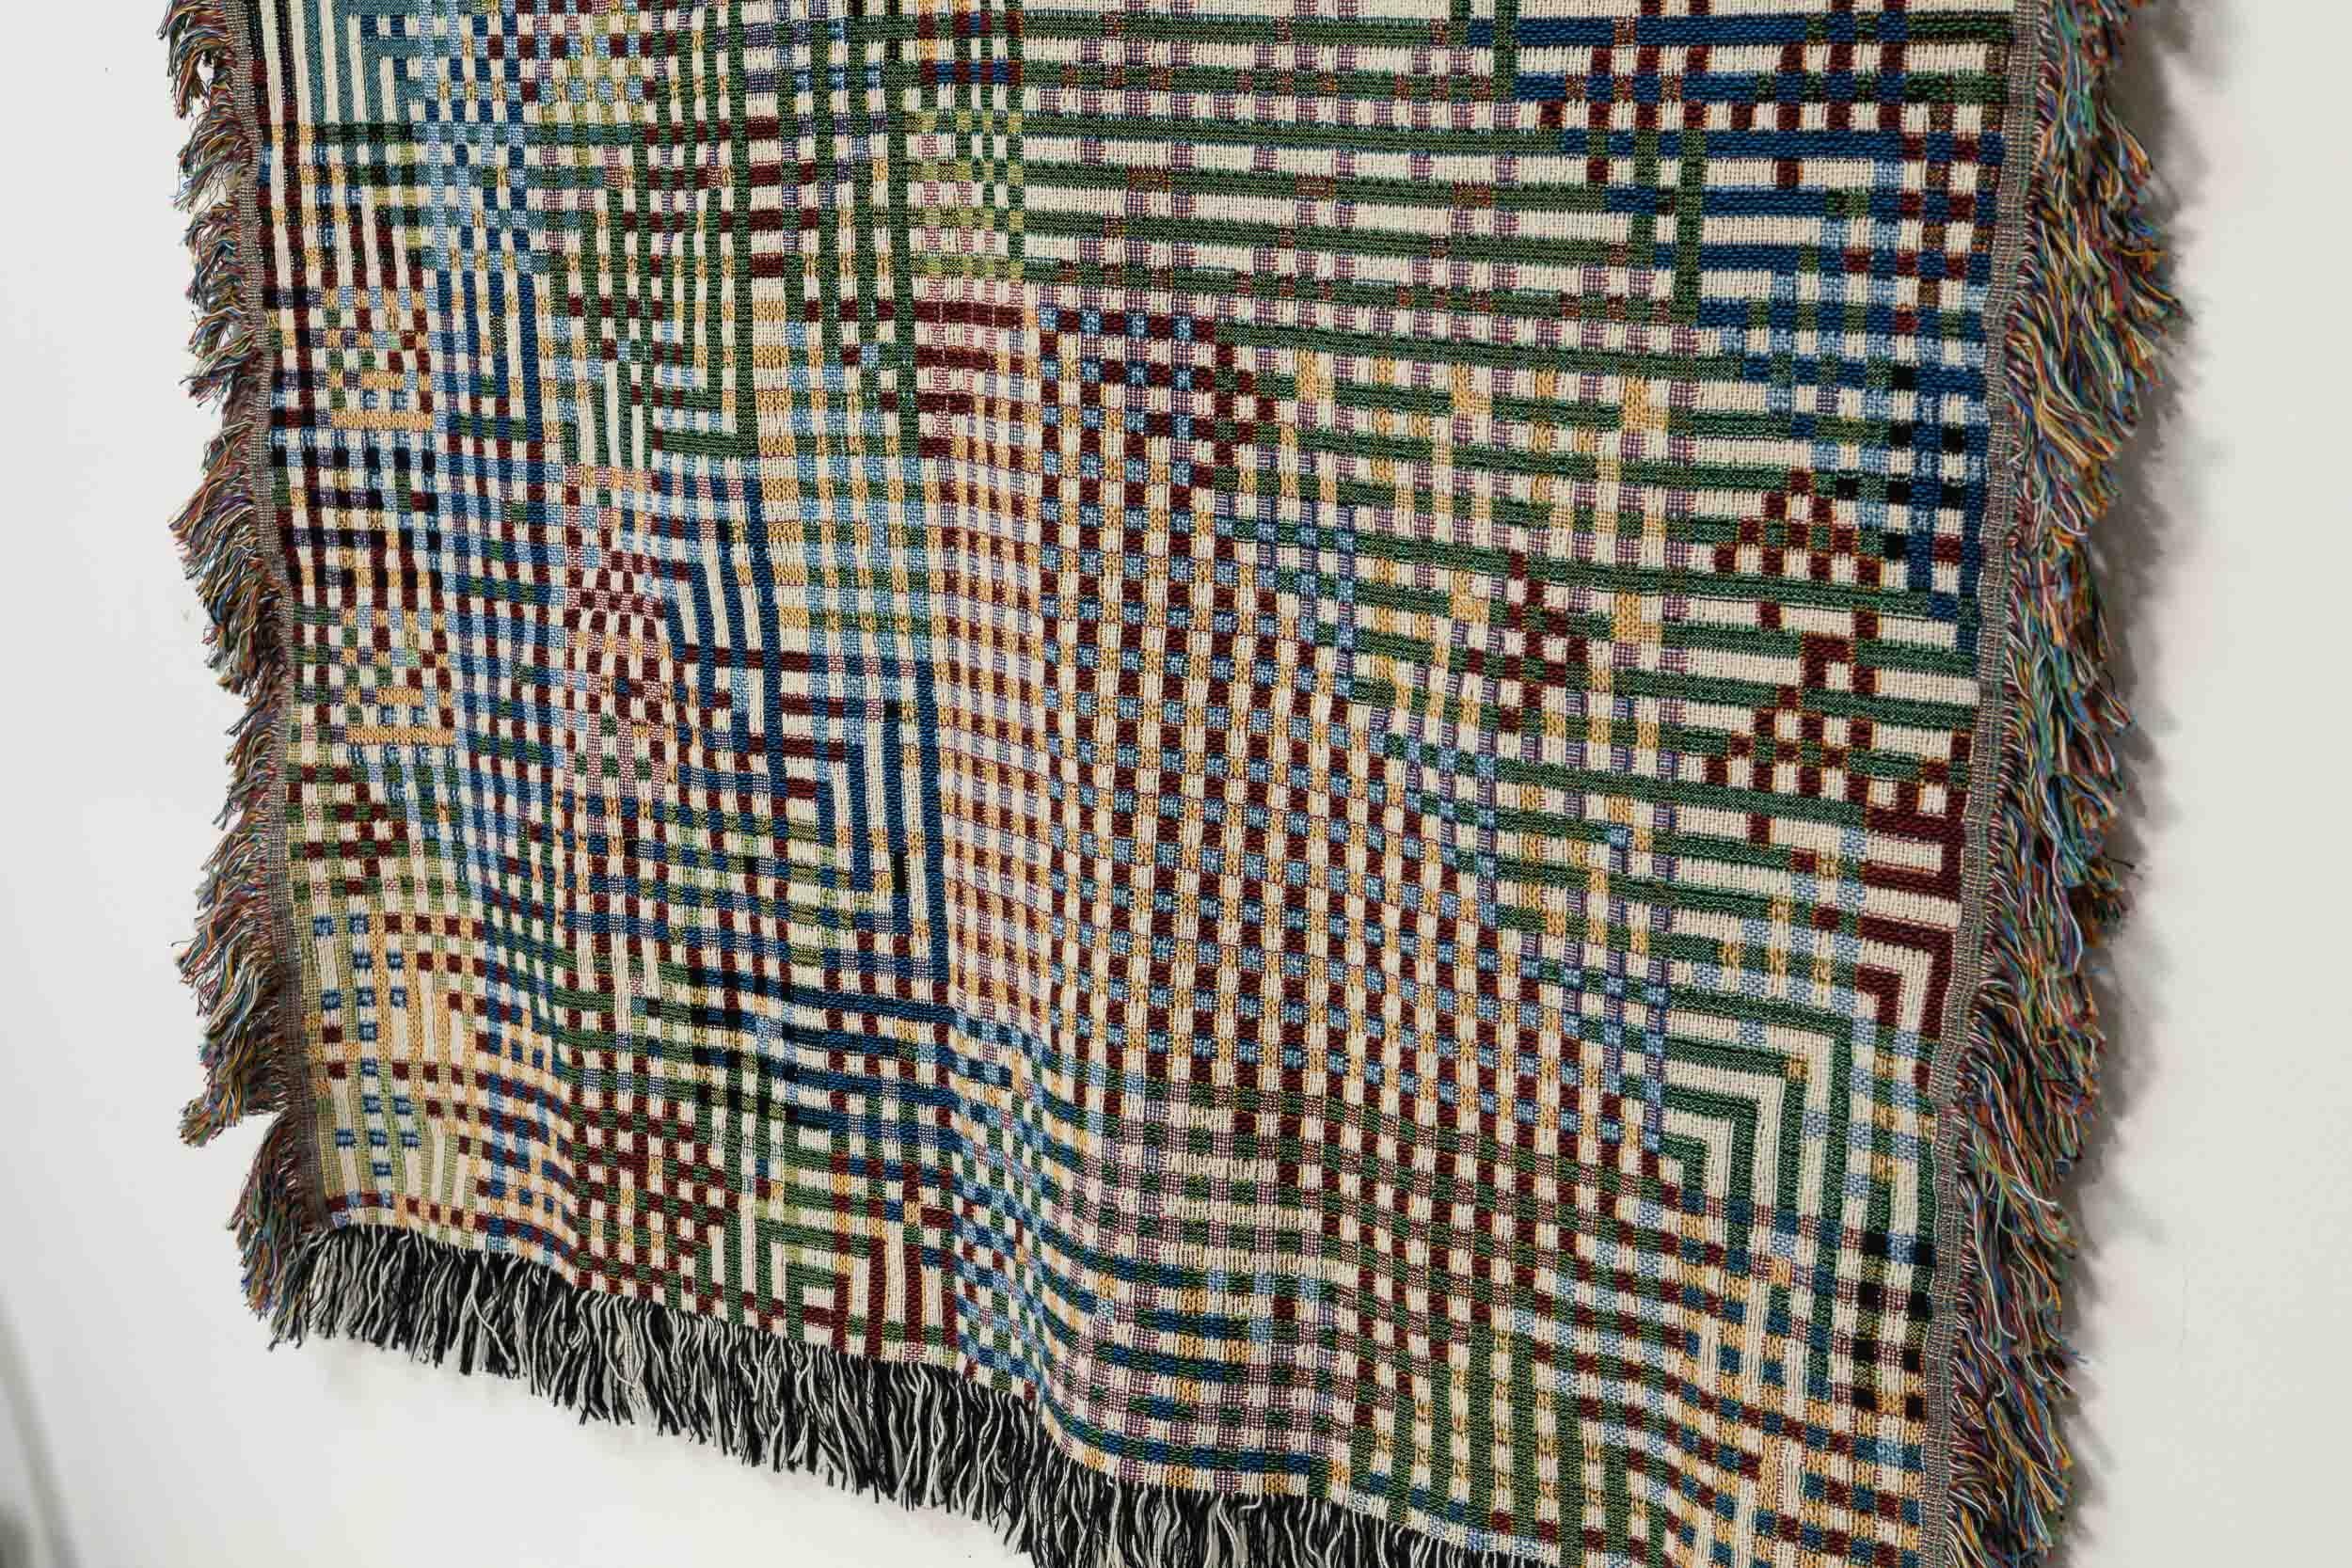 Bit map throw blanket 03 by Luft Tanaka Studio 

A multicolored graphic throw blanket / wall tapestry woven out of 100 % cotton yarn based on digital pixel art created using an early bitmap drawing software from the 1980s and 1990s.

Measures: 60